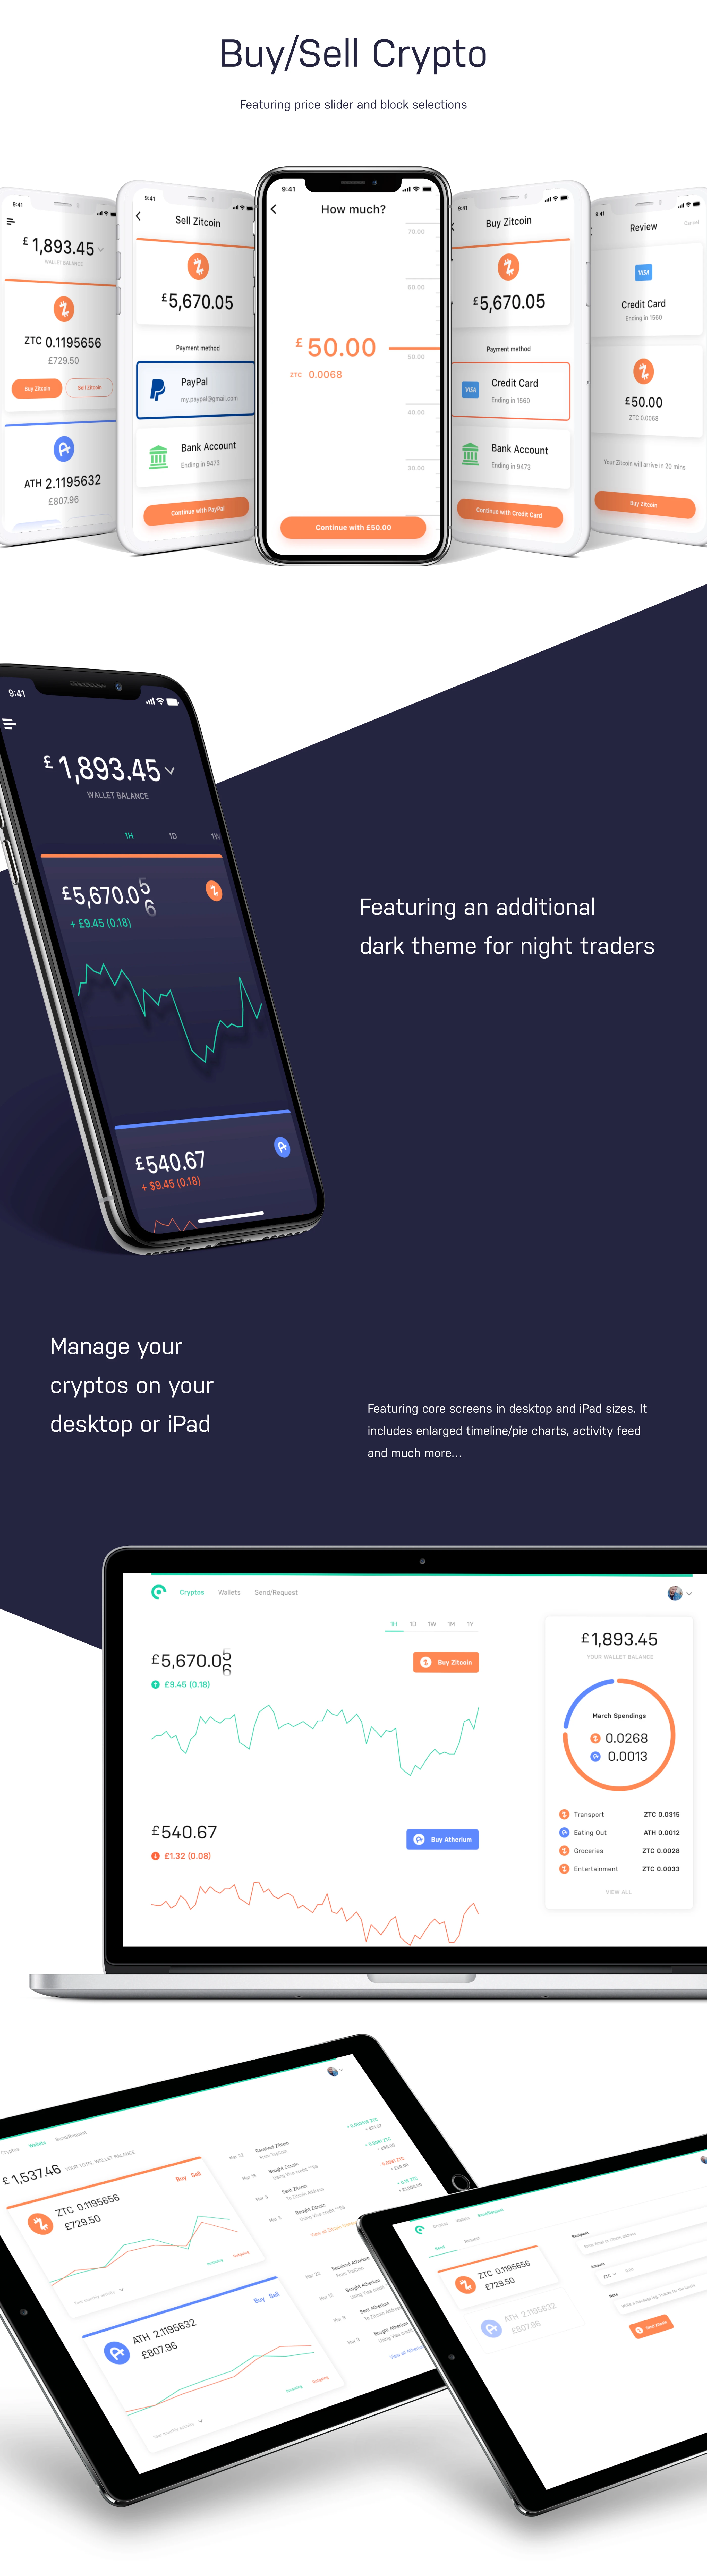 Cooin Crypto UI Kit for Adobe XD - Cooin UI Kit features iOS and web designs including flows for buying & selling digital currency, viewing currency values in line charts, personal wallets as well as sending & requesting digital currencies. Cooin contains common form elements, graphs, charts and more… It also features a light and dark theme.